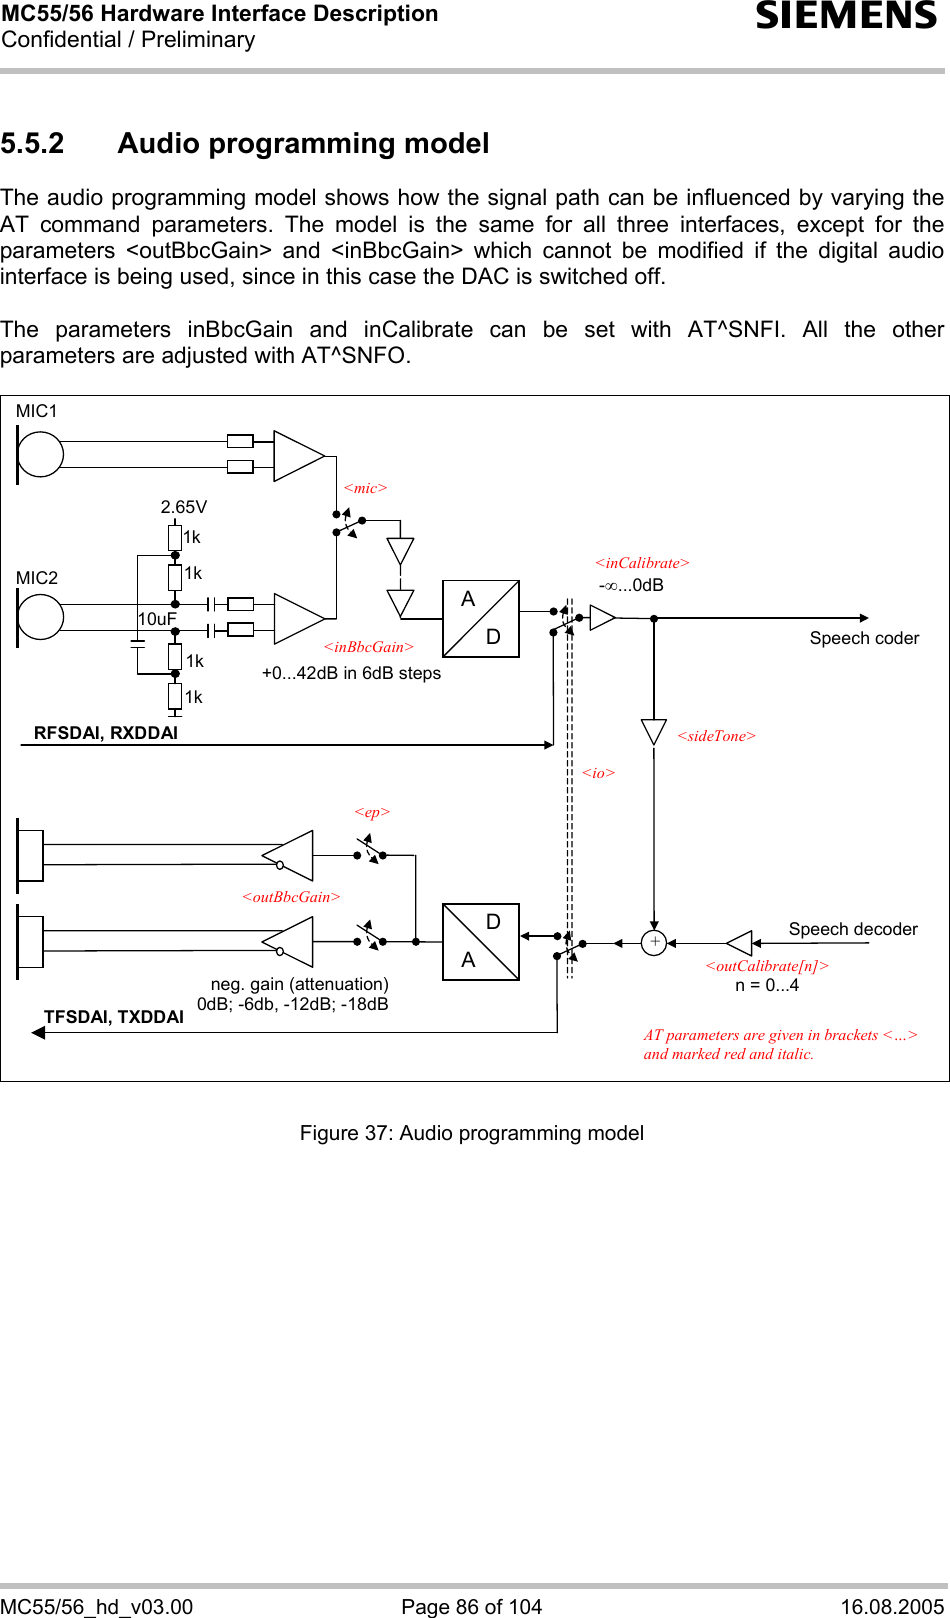 MC55/56 Hardware Interface Description Confidential / Preliminary s MC55/56_hd_v03.00  Page 86 of 104  16.08.2005 5.5.2  Audio programming model The audio programming model shows how the signal path can be influenced by varying the AT command parameters. The model is the same for all three interfaces, except for the parameters &lt;outBbcGain&gt; and &lt;inBbcGain&gt; which cannot be modified if the digital audio interface is being used, since in this case the DAC is switched off.  The parameters inBbcGain and inCalibrate can be set with AT^SNFI. All the other parameters are adjusted with AT^SNFO.   ADAD-∞...0dBSpeech coderneg. gain (attenuation) 0dB; -6db, -12dB; -18dB +0...42dB in 6dB steps 1k 1k 1k 1k 2.65V 10uF + &lt;sideTone&gt; AT parameters are given in brackets &lt;…&gt; and marked red and italic. &lt;outCalibrate[n]&gt; n = 0...4 &lt;inCalibrate&gt; &lt;inBbcGain&gt; &lt;outBbcGain&gt; Speech decoderMIC2 TFSDAI, TXDDAI RFSDAI, RXDDAI MIC1 &lt;io&gt;&lt;ep&gt;&lt;mic&gt;  Figure 37: Audio programming model 